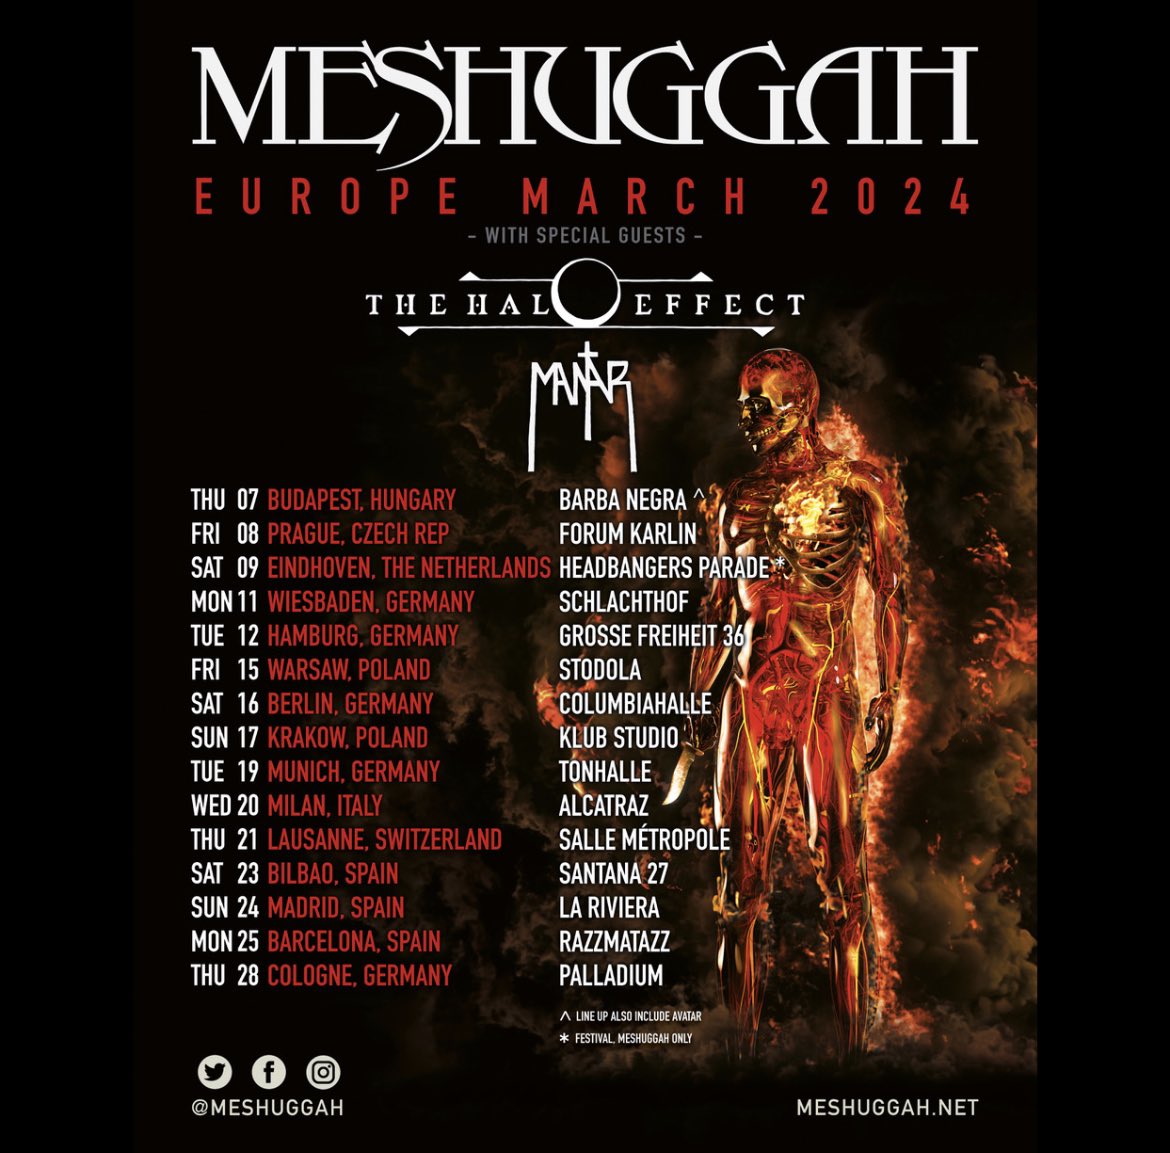 Halos, it’s soon time to hit the roads with the mighty Meshuggah and MANTAR 💚 Where will we see you? Get your tickets here: thehaloeffect.band